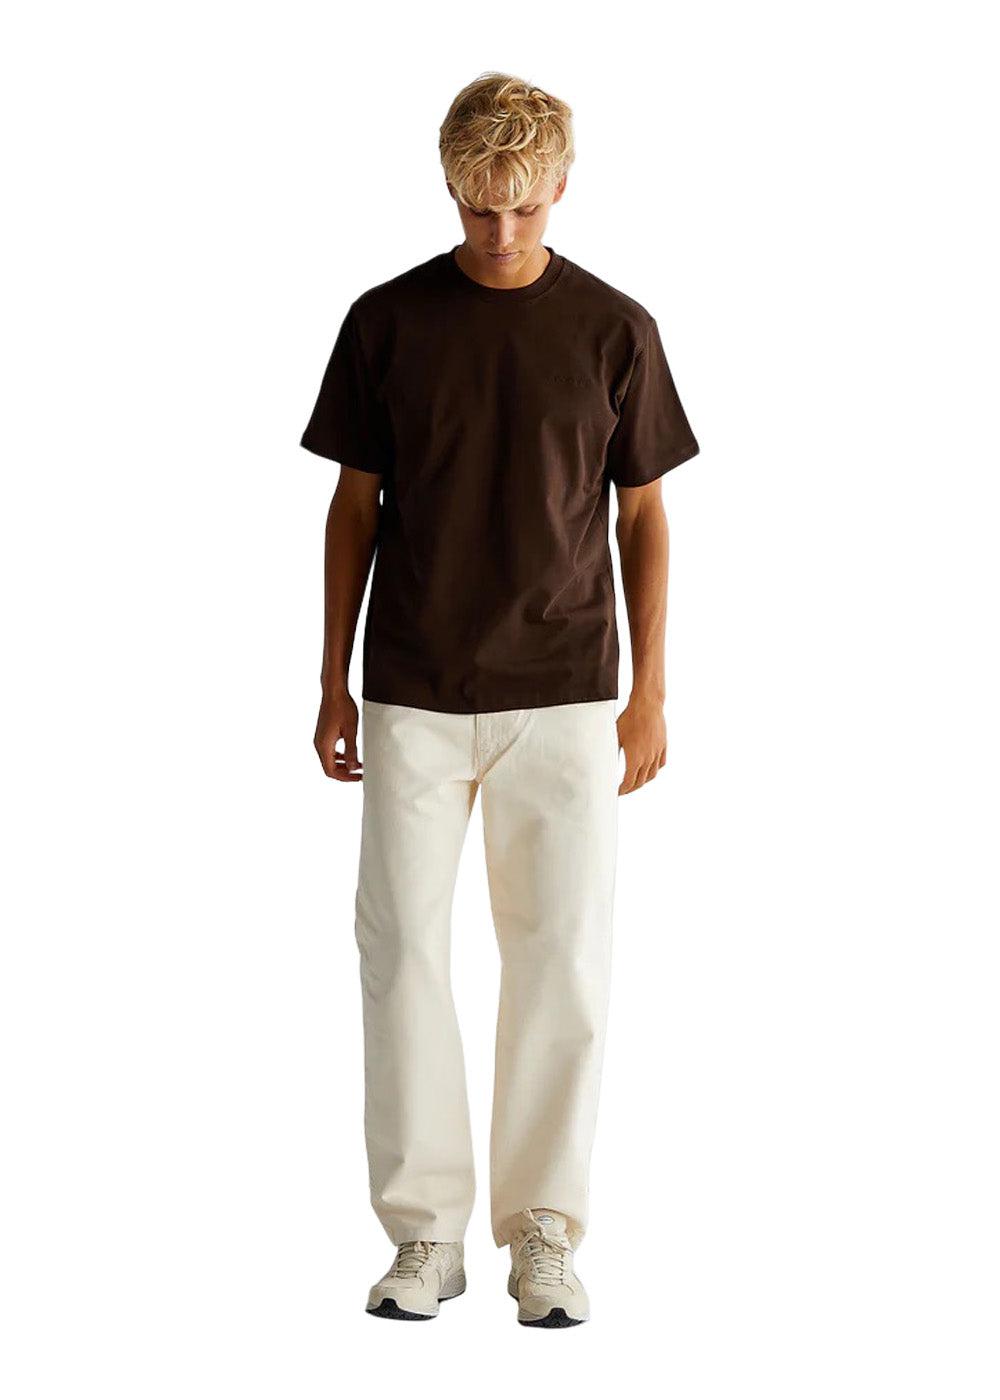 Leroy Twill Pants - Off White